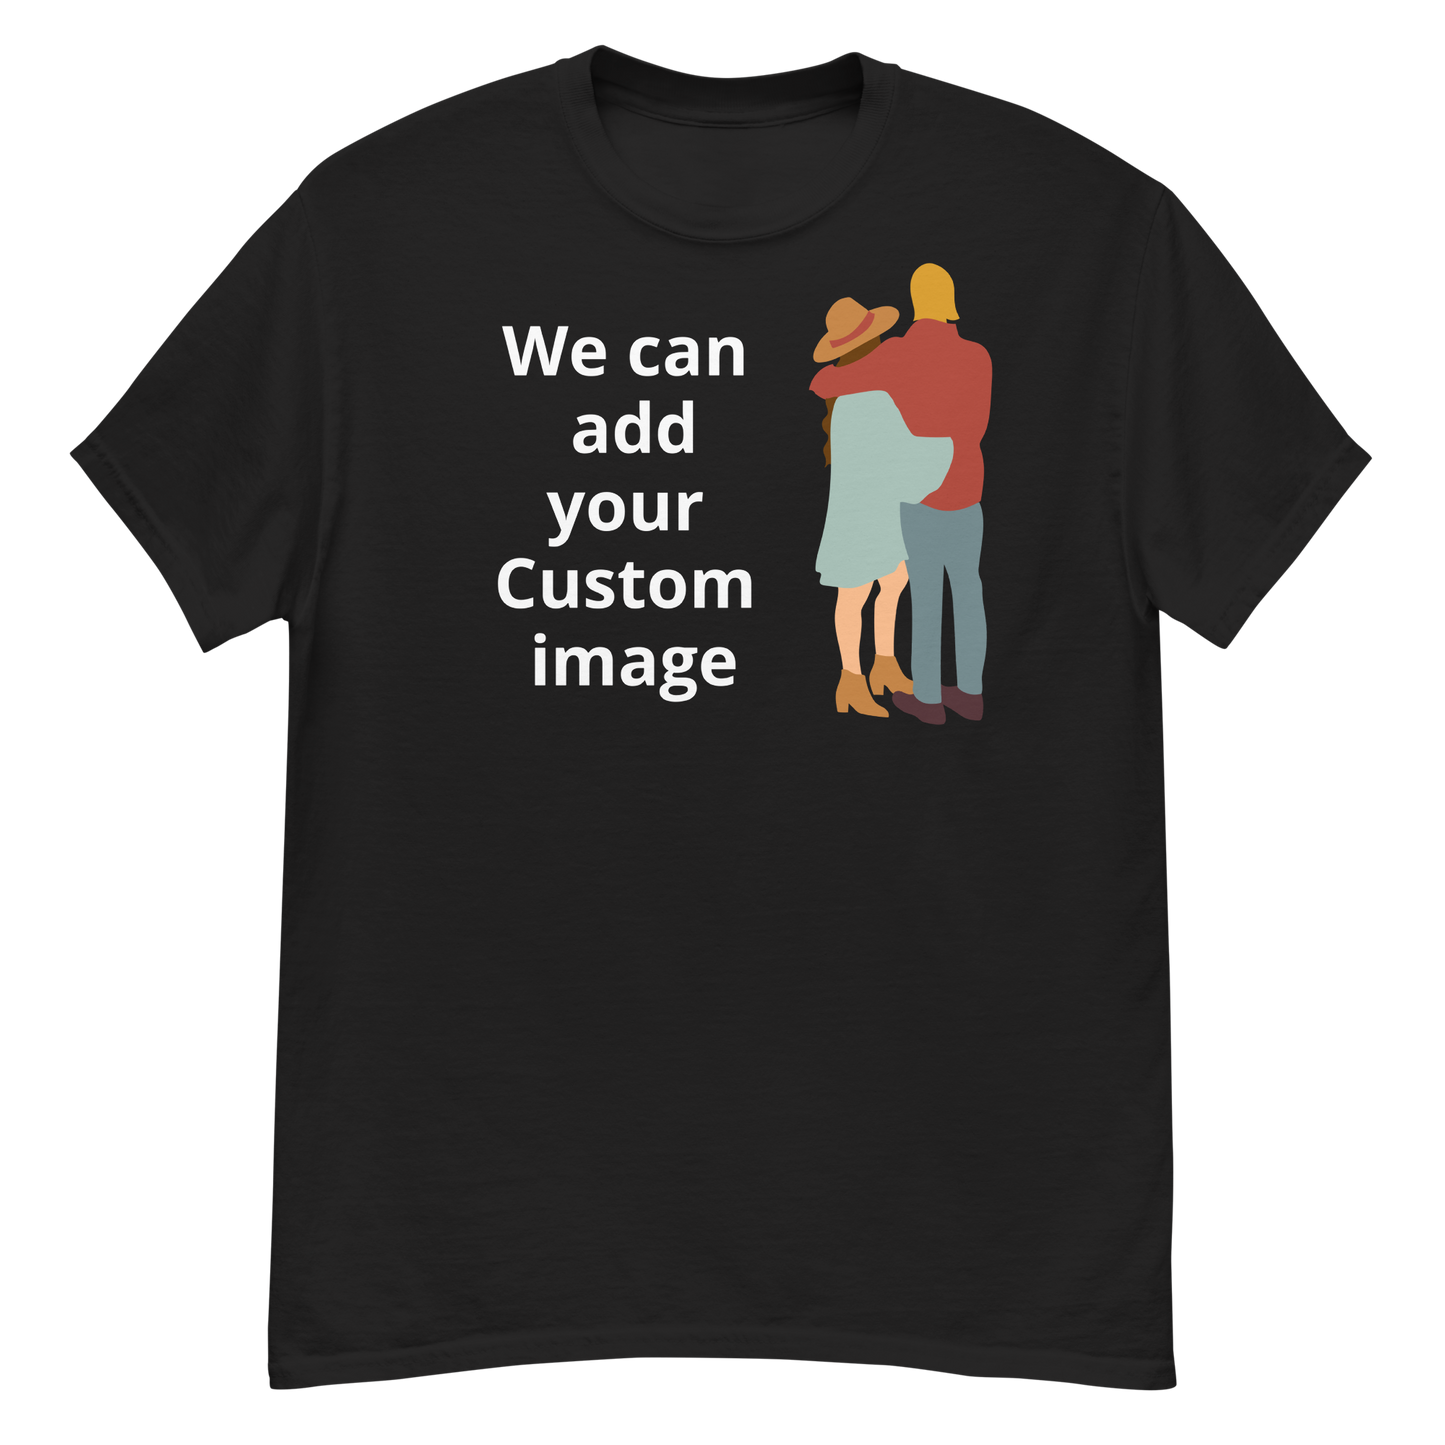 Personalised Custom T shirt with Custom image - Just send your text or image